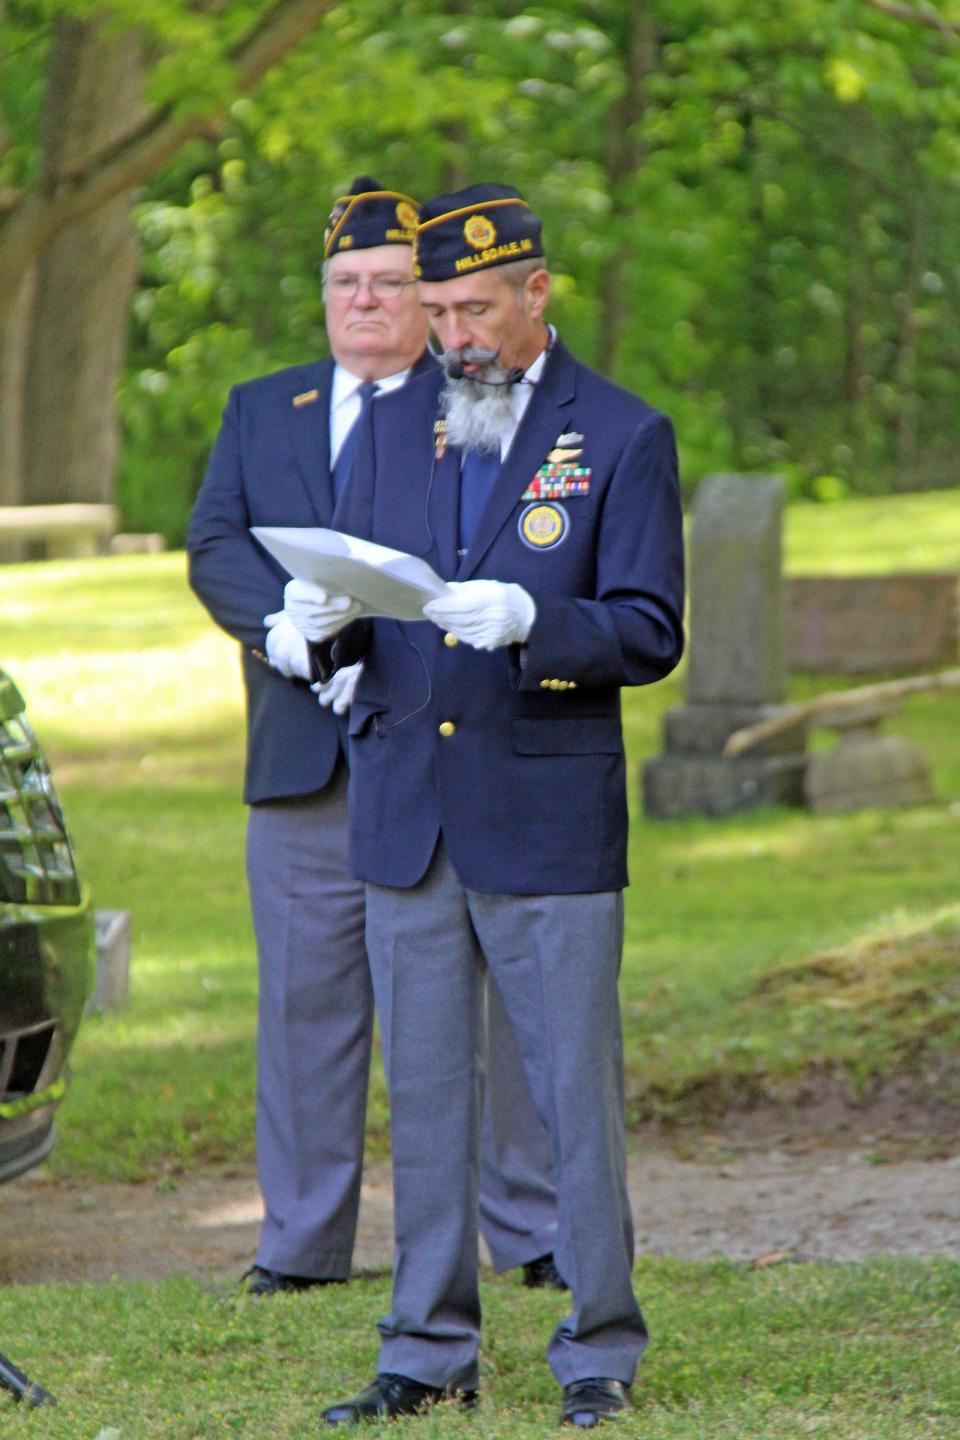 Hillsdale American Legion Post Commander Chris Parks reads the names of deceased veterans buried at Oak Grove Cemetery in Hillsdale while Past Commander Sid Michael looks on.